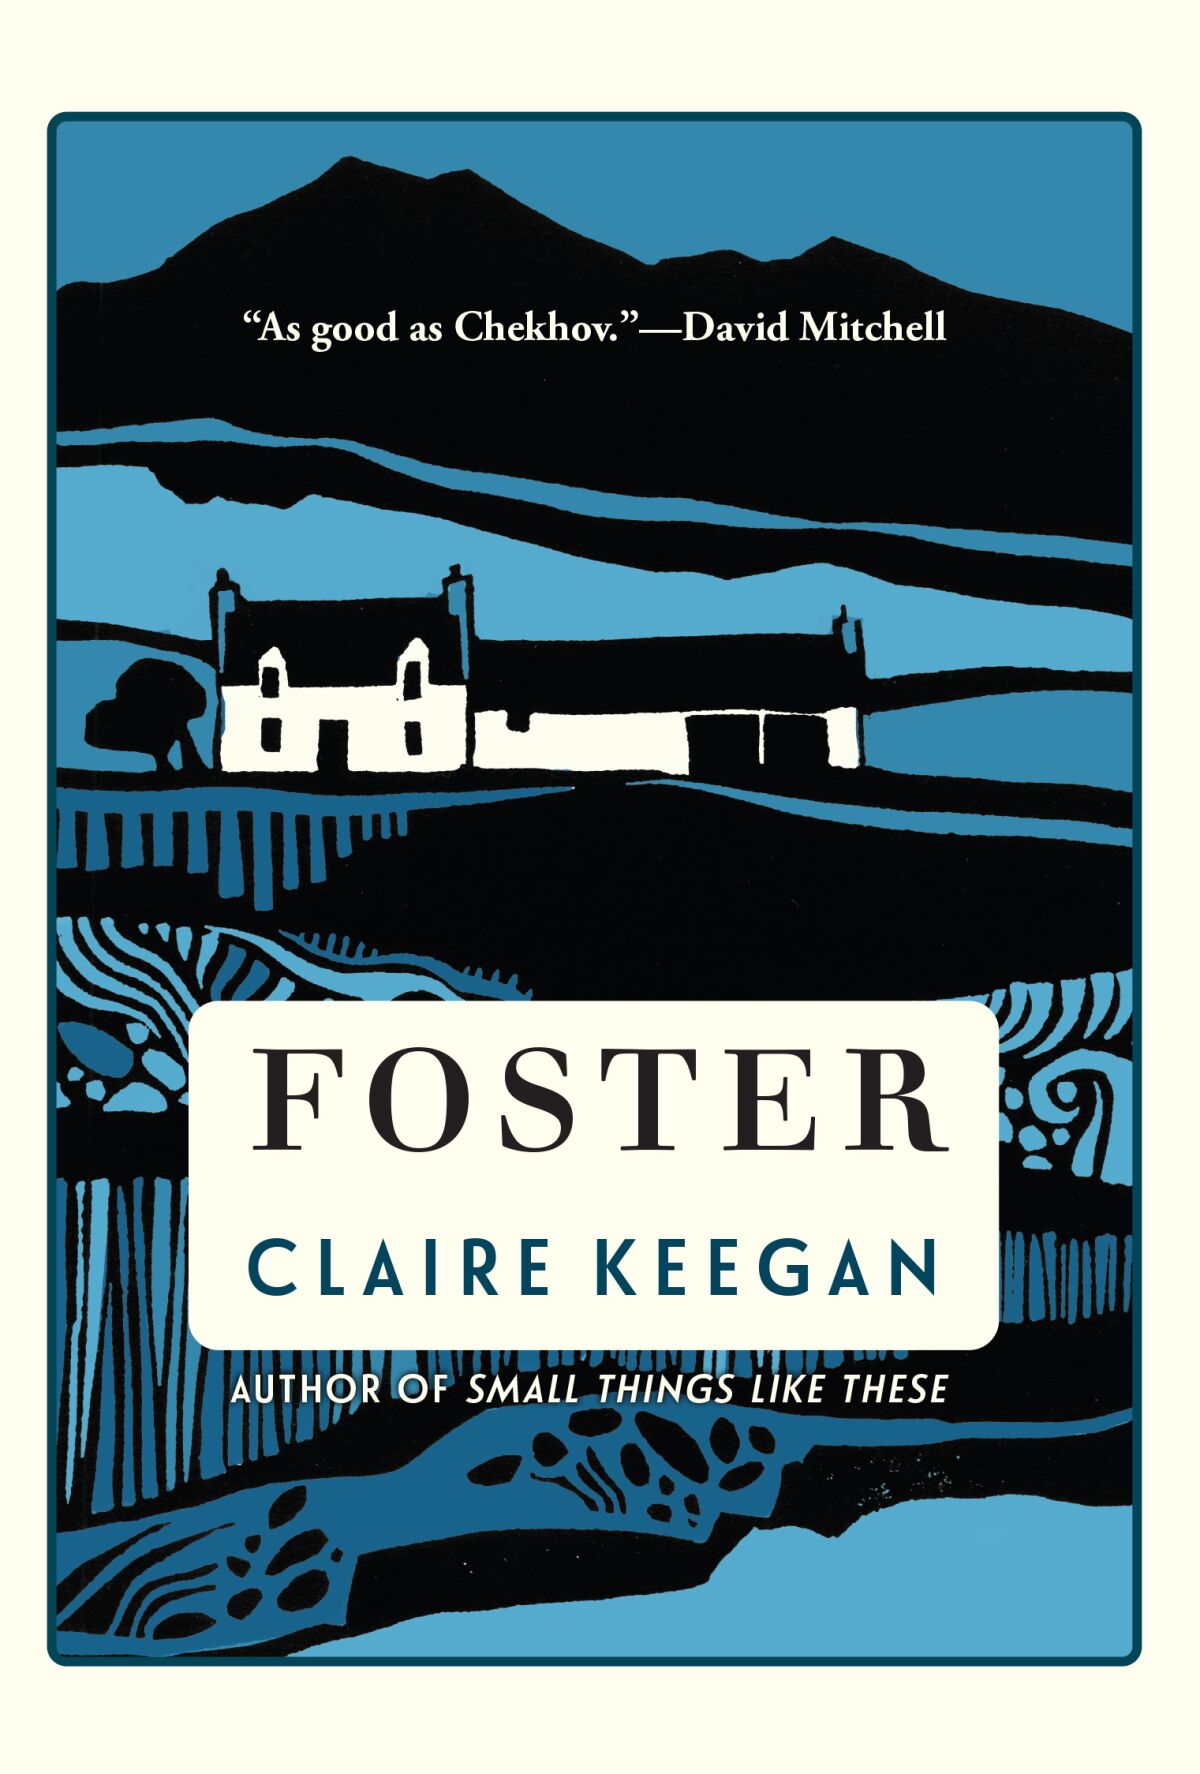 "Foster," by Claire Keegan